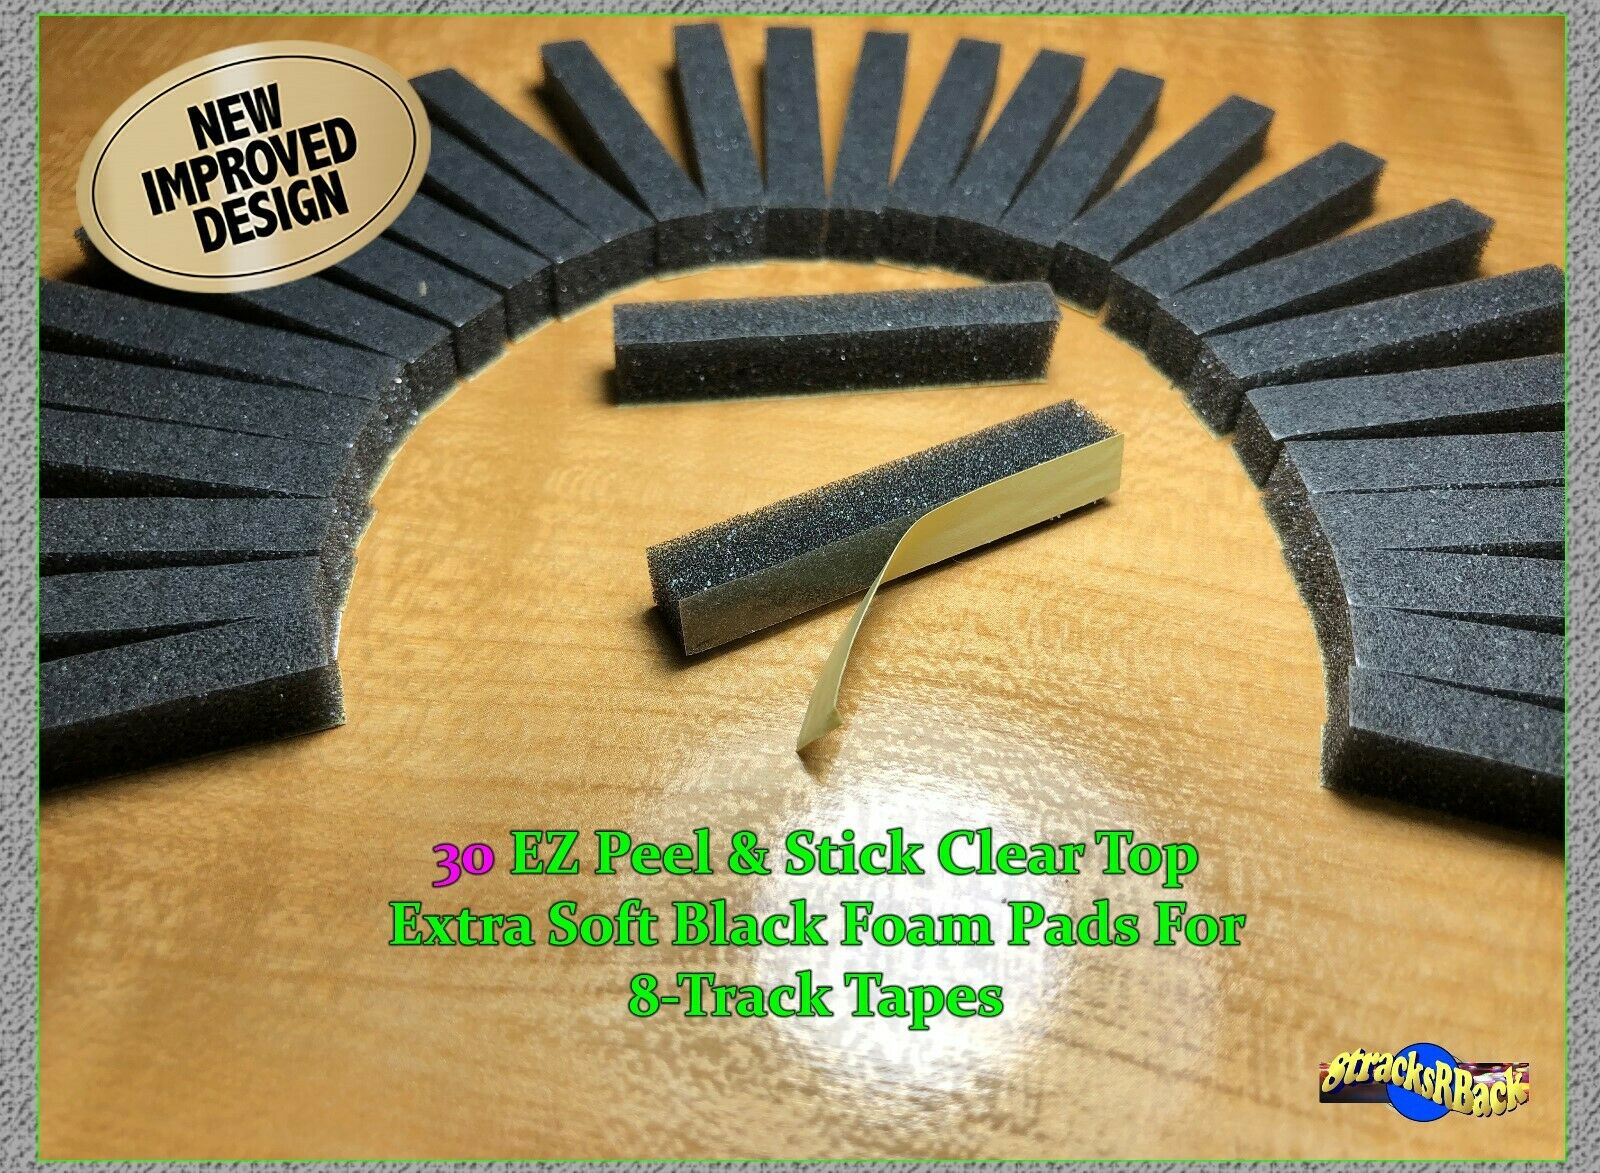 30 Ez Peel & Stick Clear Top Extra Soft Black Foam Pads For 8-track Tape